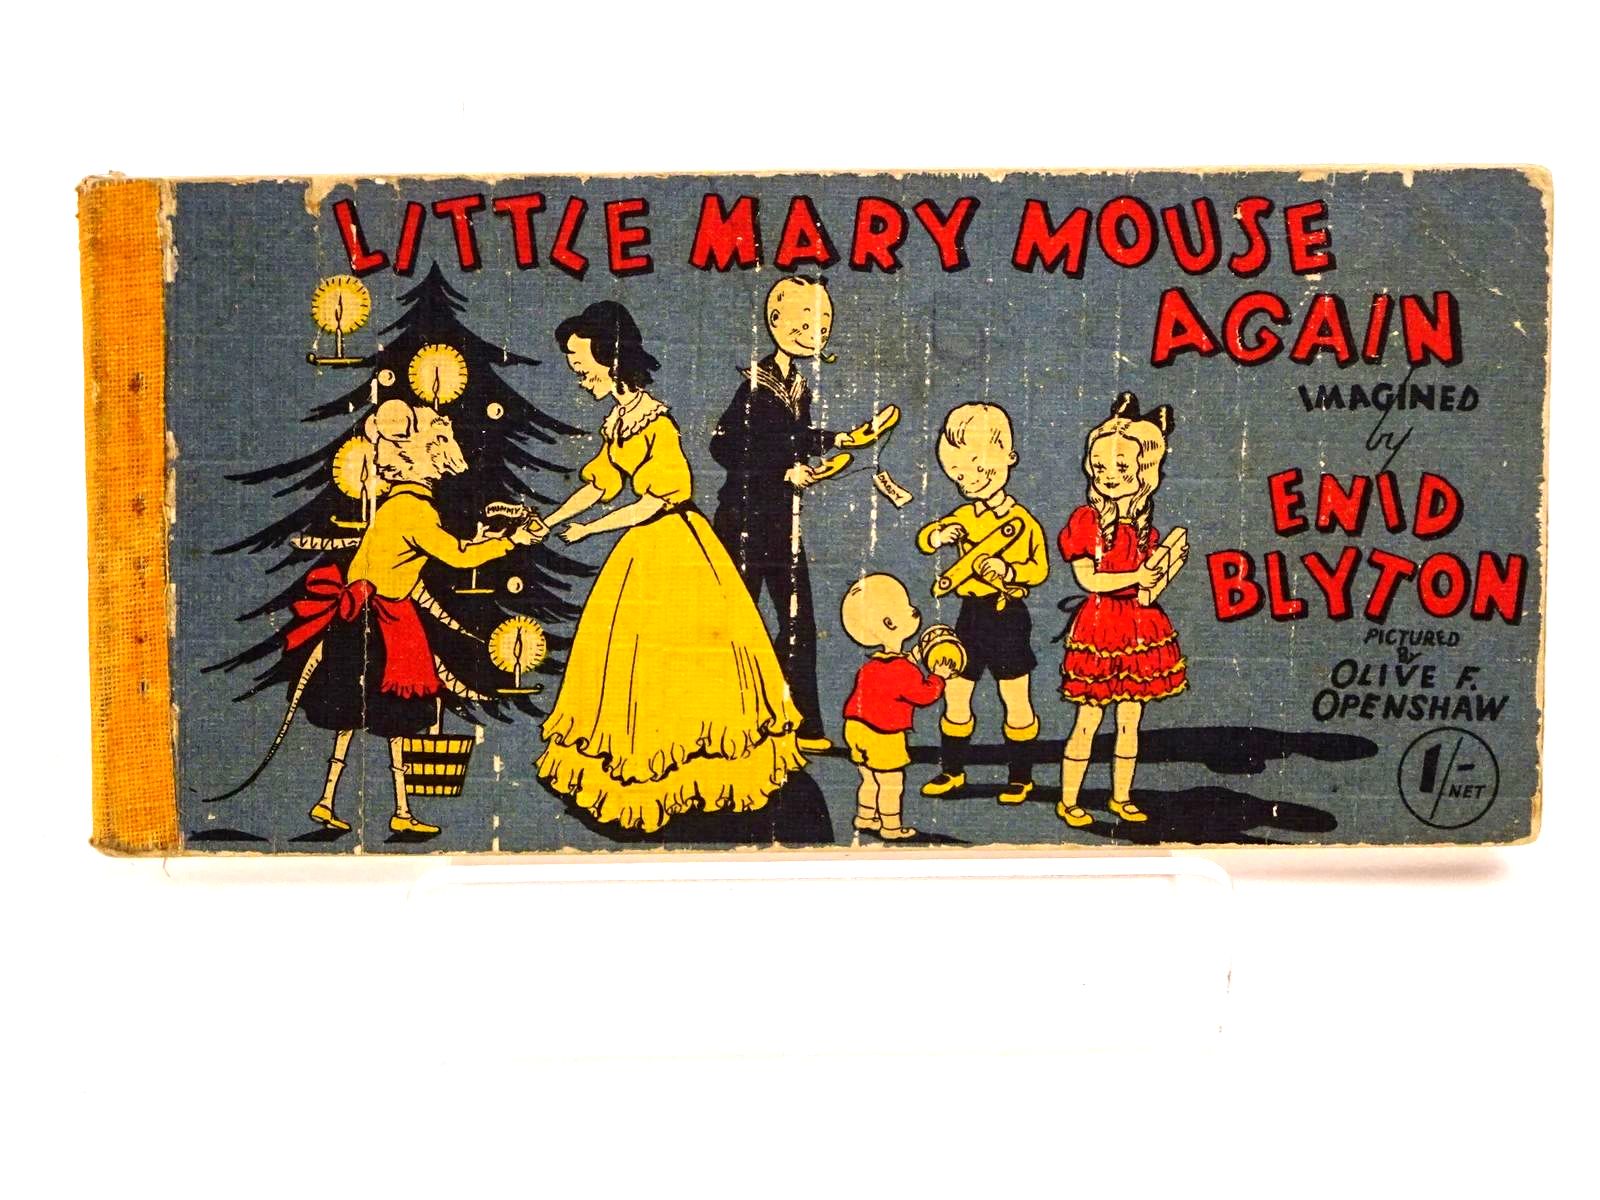 Photo of LITTLE MARY MOUSE AGAIN written by Blyton, Enid illustrated by Openshaw, Olive F. published by Brockhampton Press (STOCK CODE: 1318184)  for sale by Stella & Rose's Books